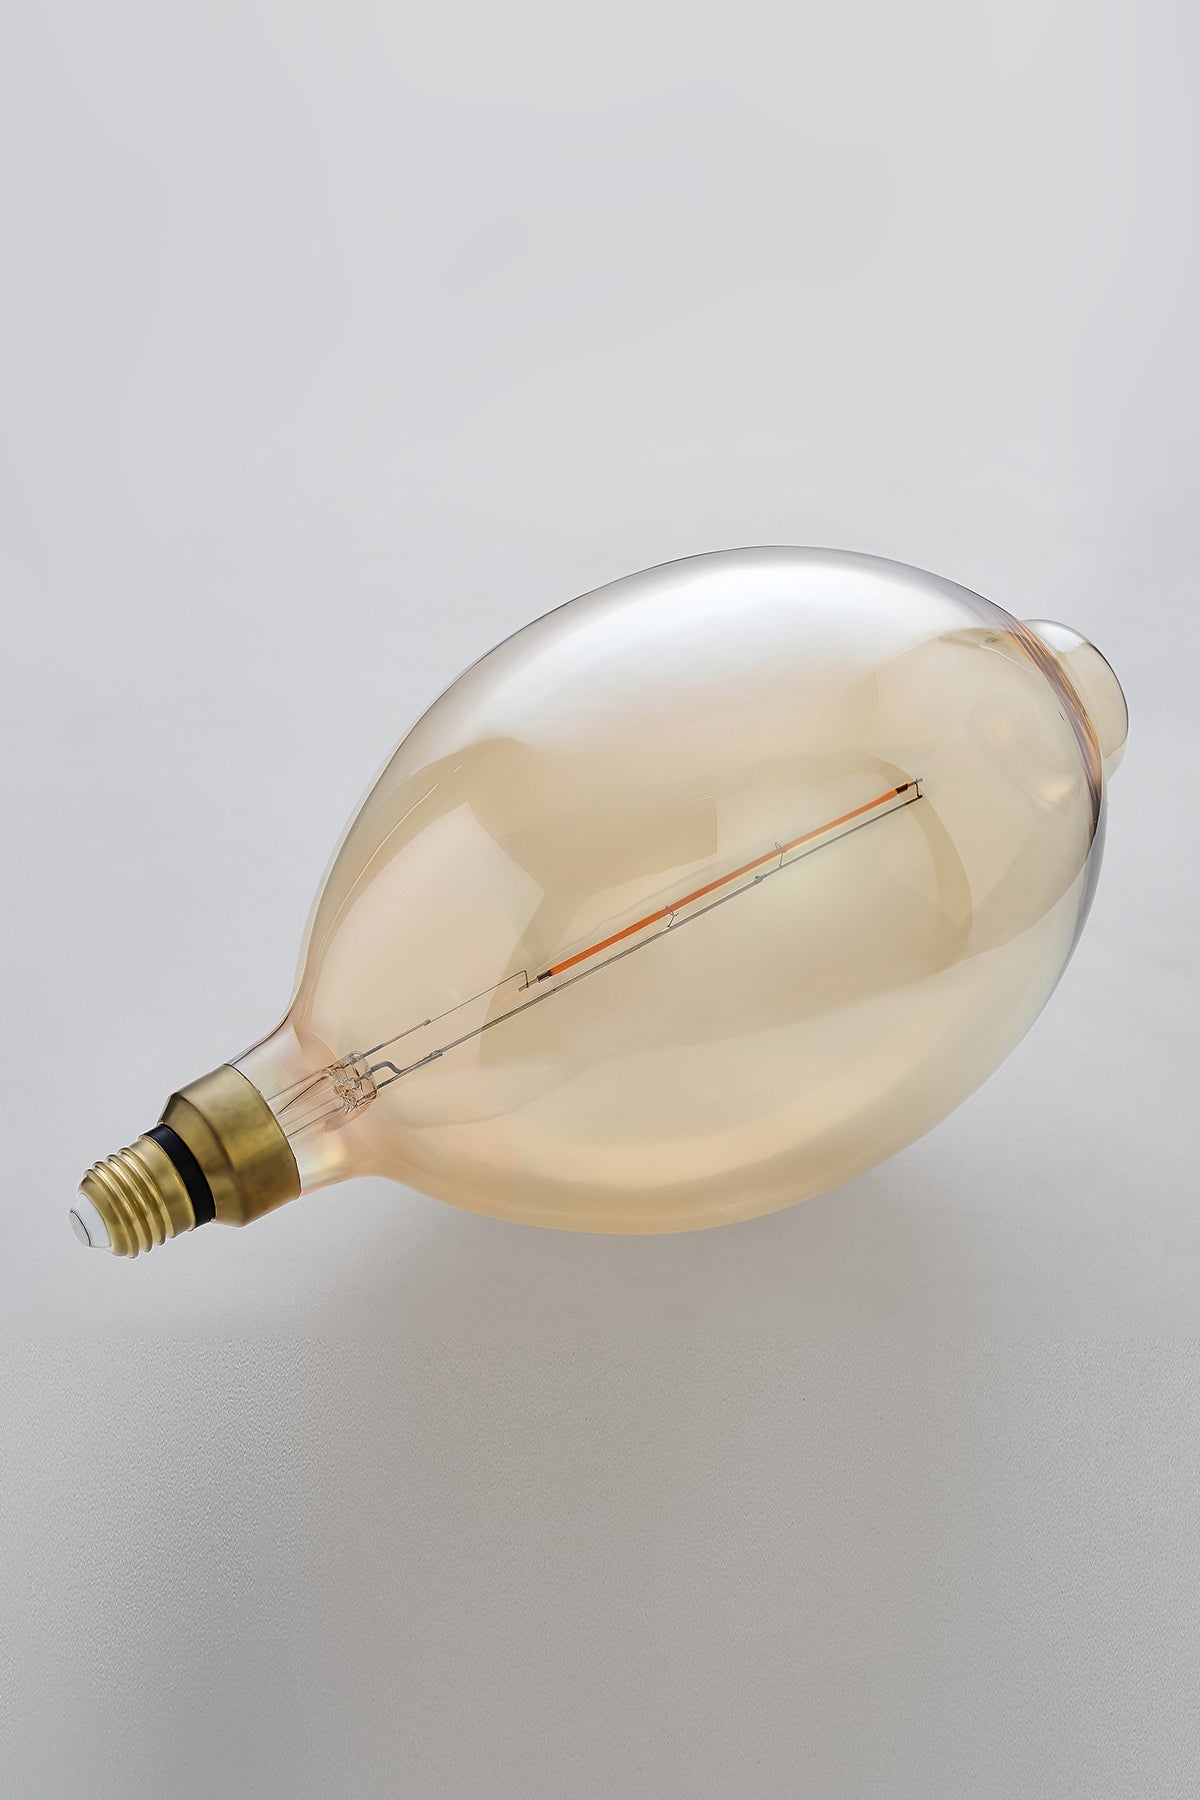 Modern oval LED light bulb with warm vintage Edison style glow